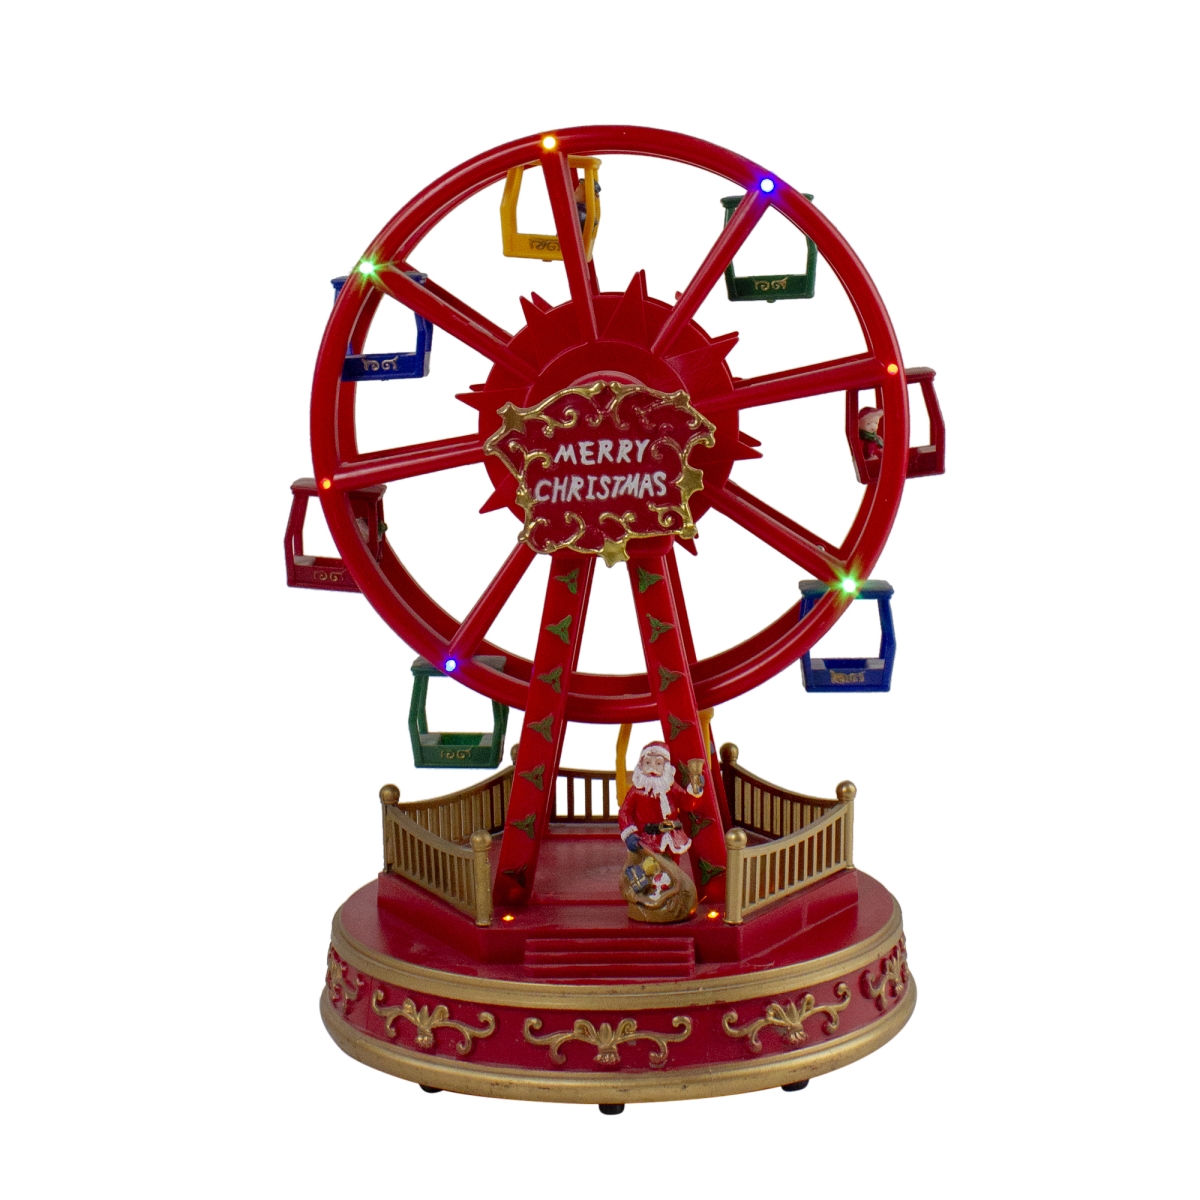 Picture of Northlight 34109645 11.25 in. LED Lighted & Musical Rotating Christmas Ferris Wheel